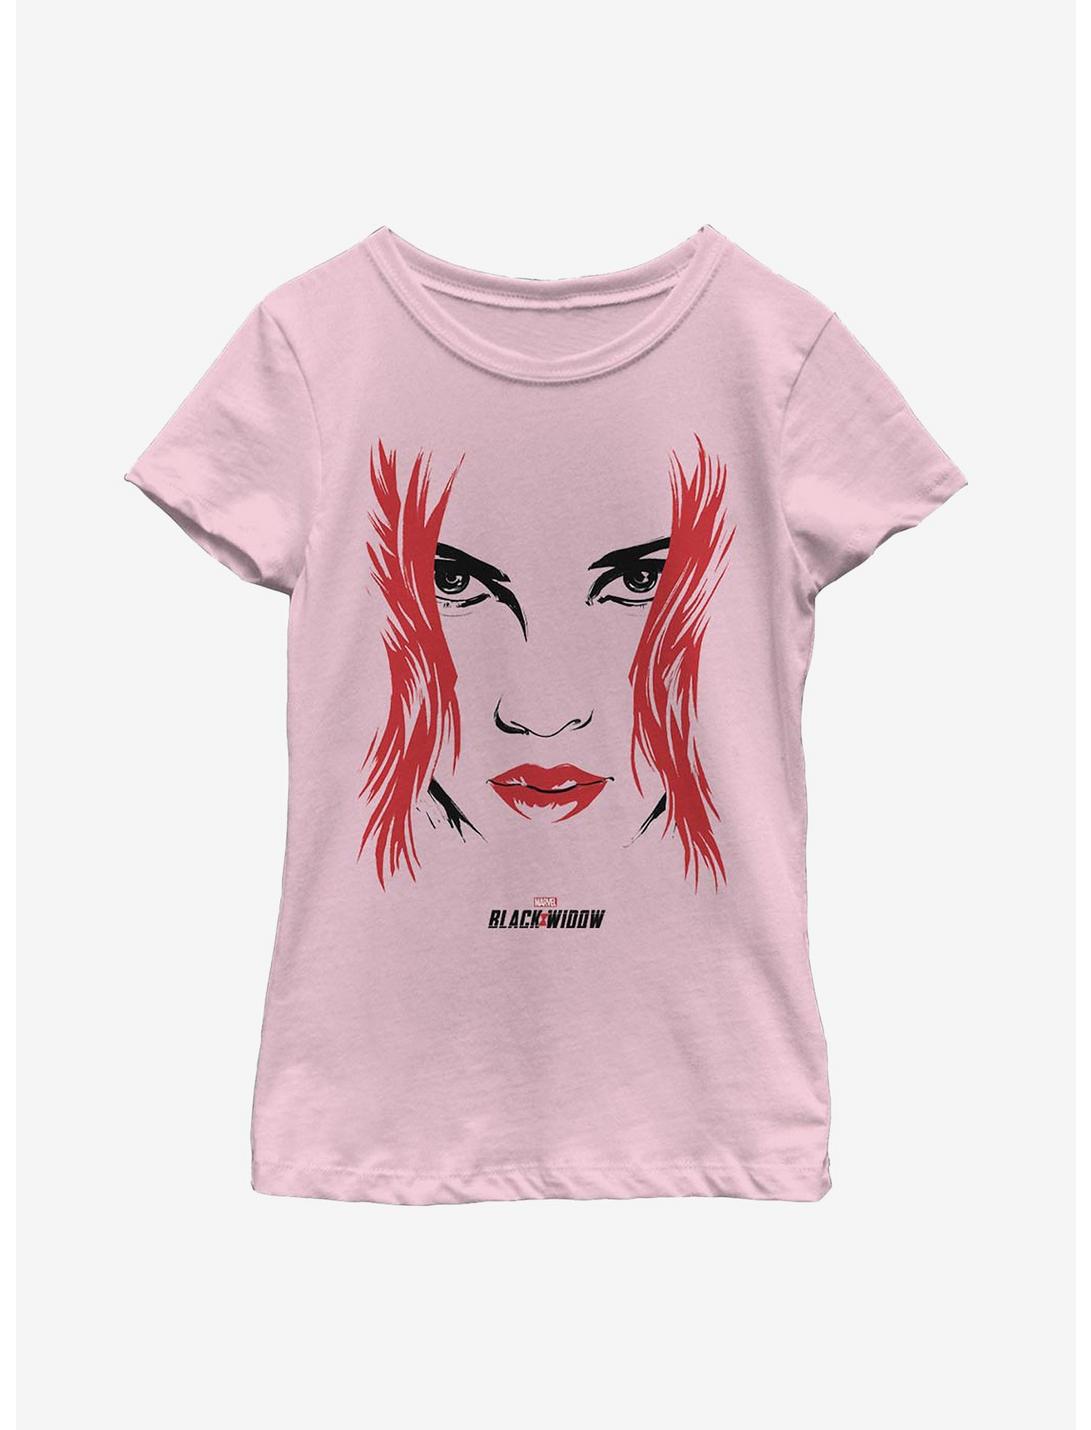 Marvel Black Widow Face Youth Girls T-Shirt, PINK, hi-res